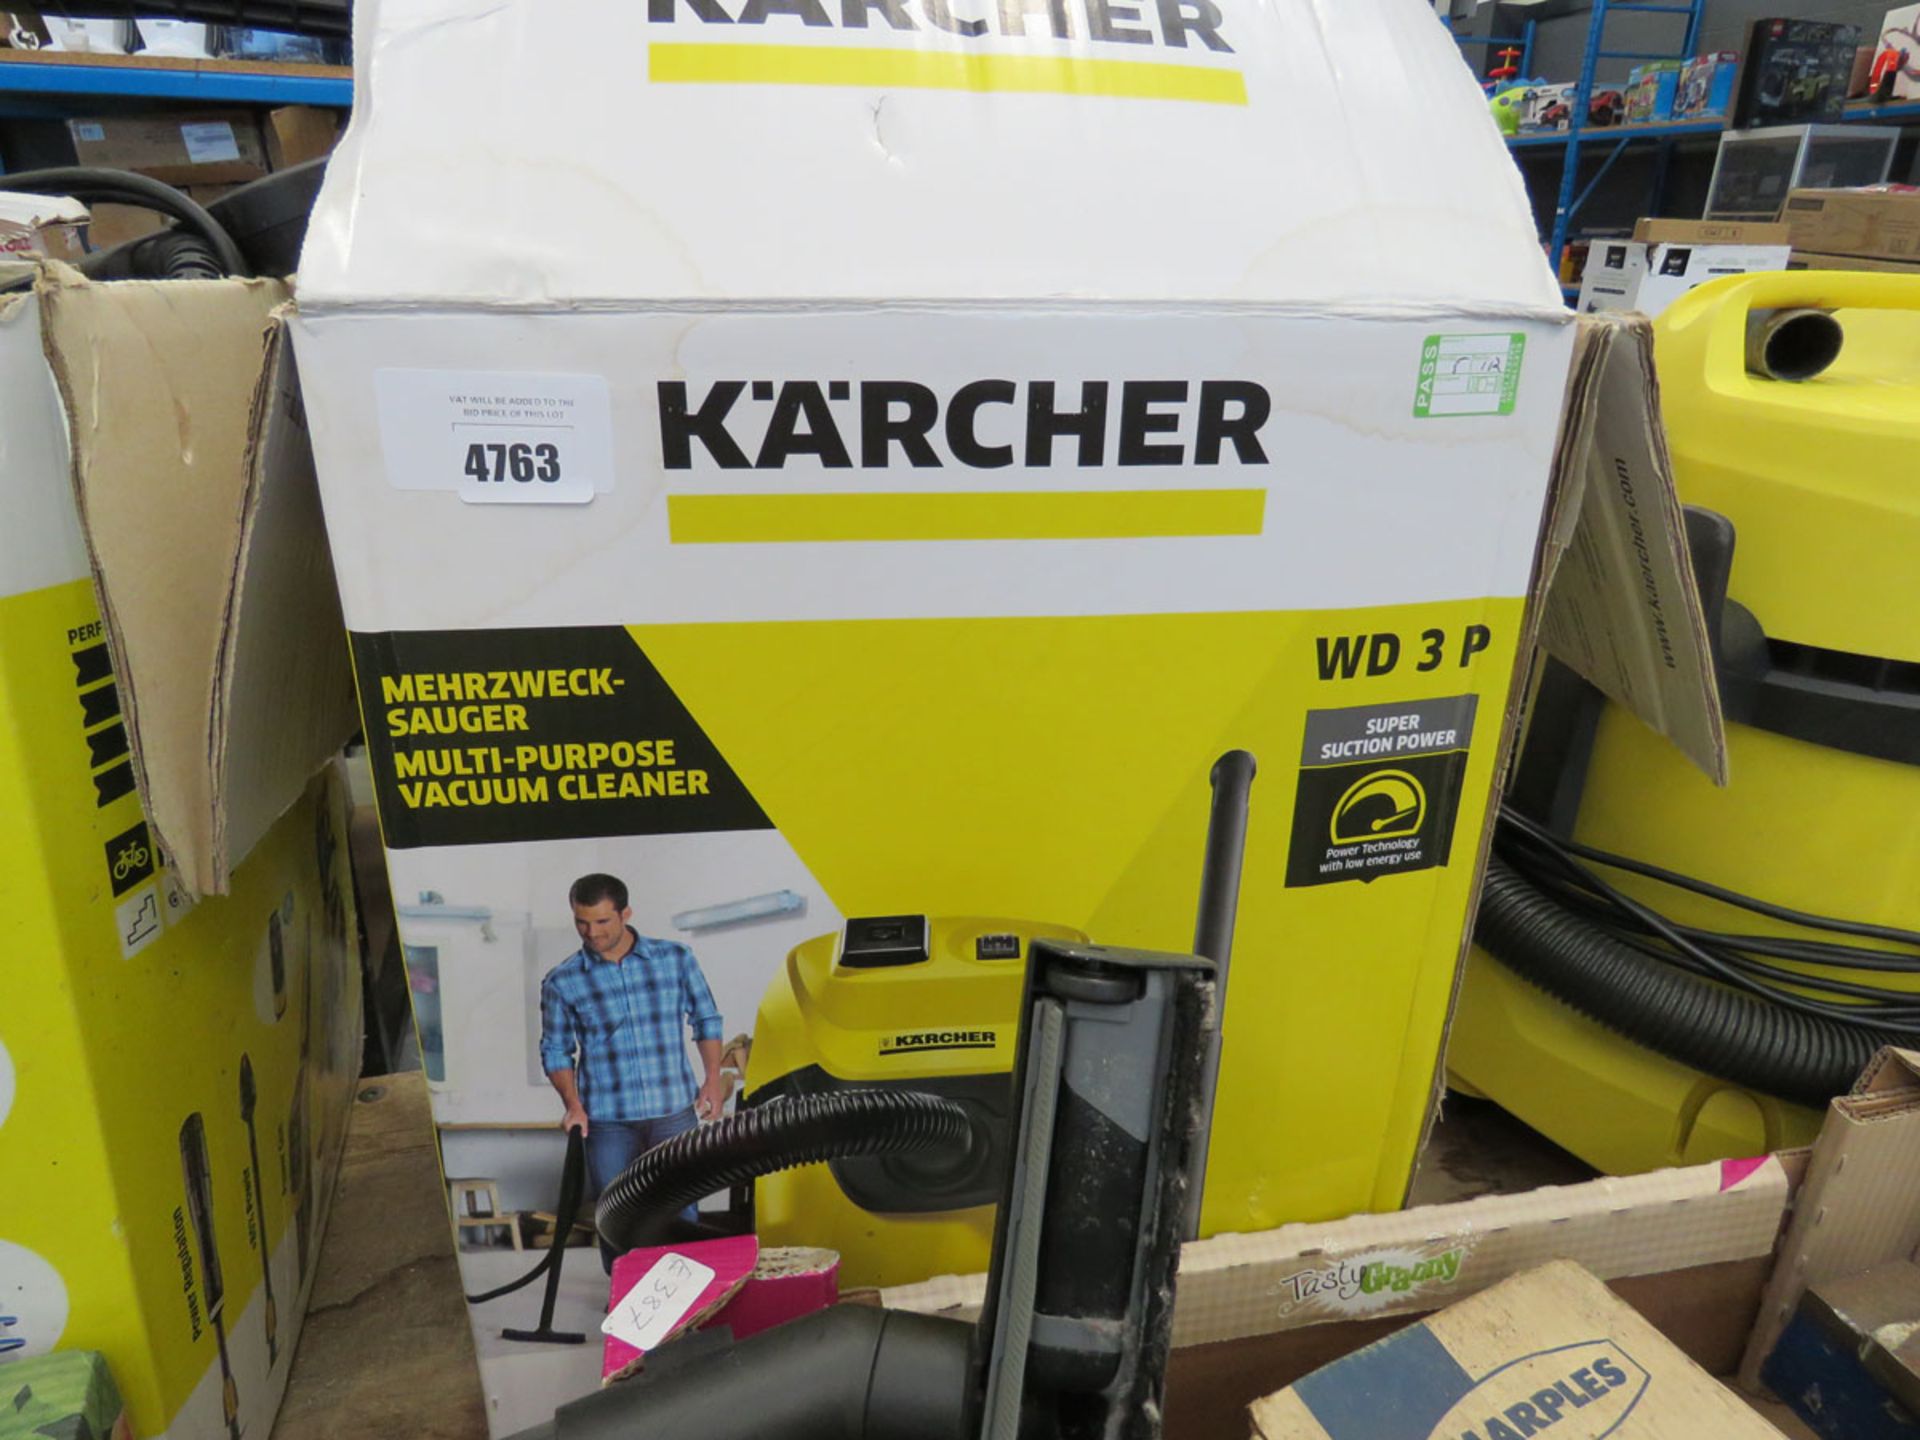 Karcher vacuum cleaner (boxed)